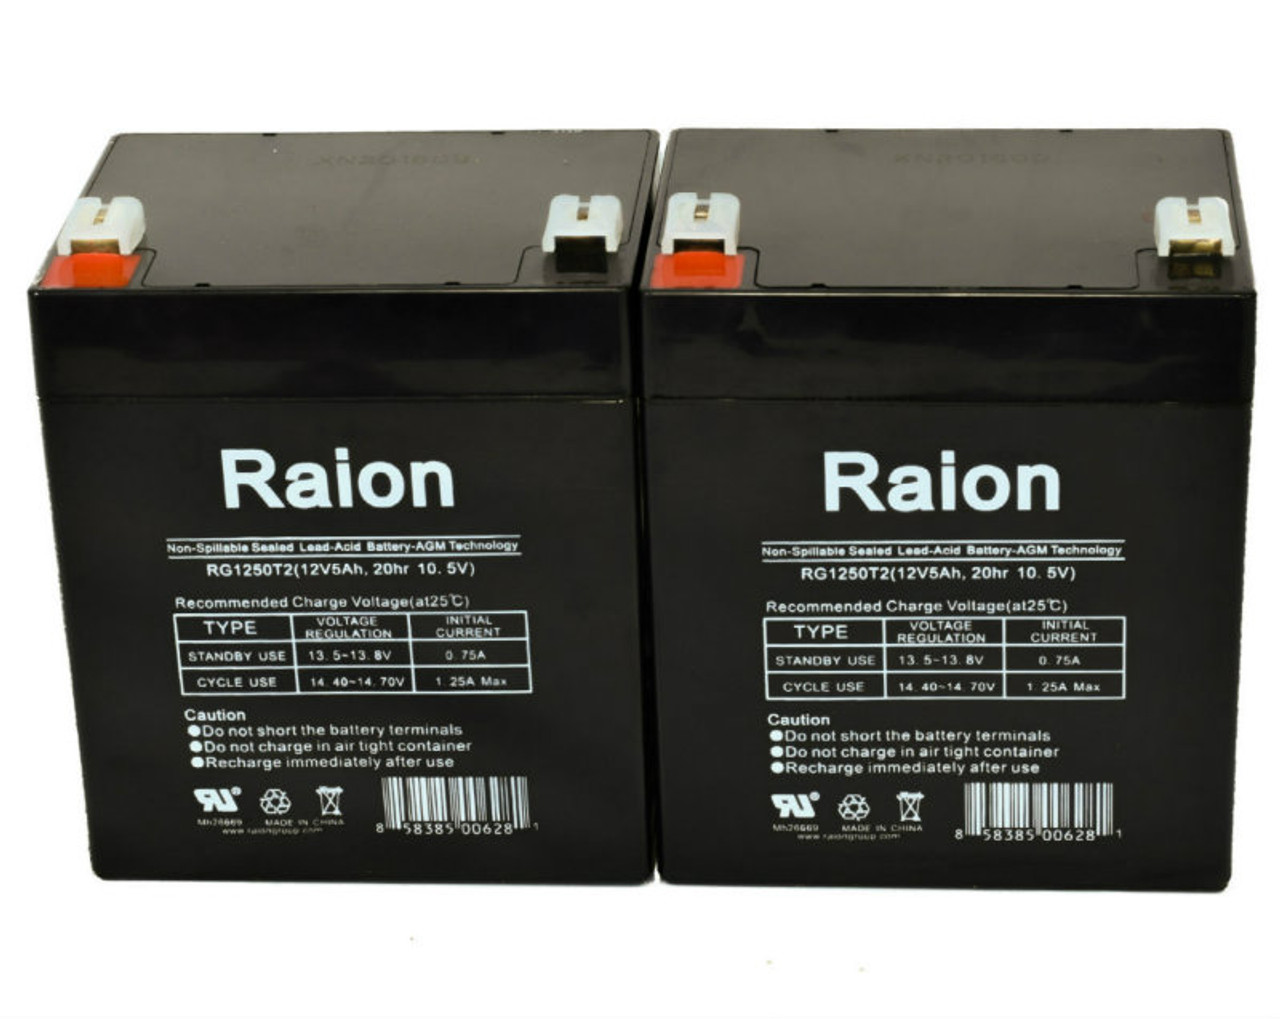 Raion Power 12V 5Ah RG1250T2 Replacement Lead Acid Battery for Weida HX12-4 - 2 Pack